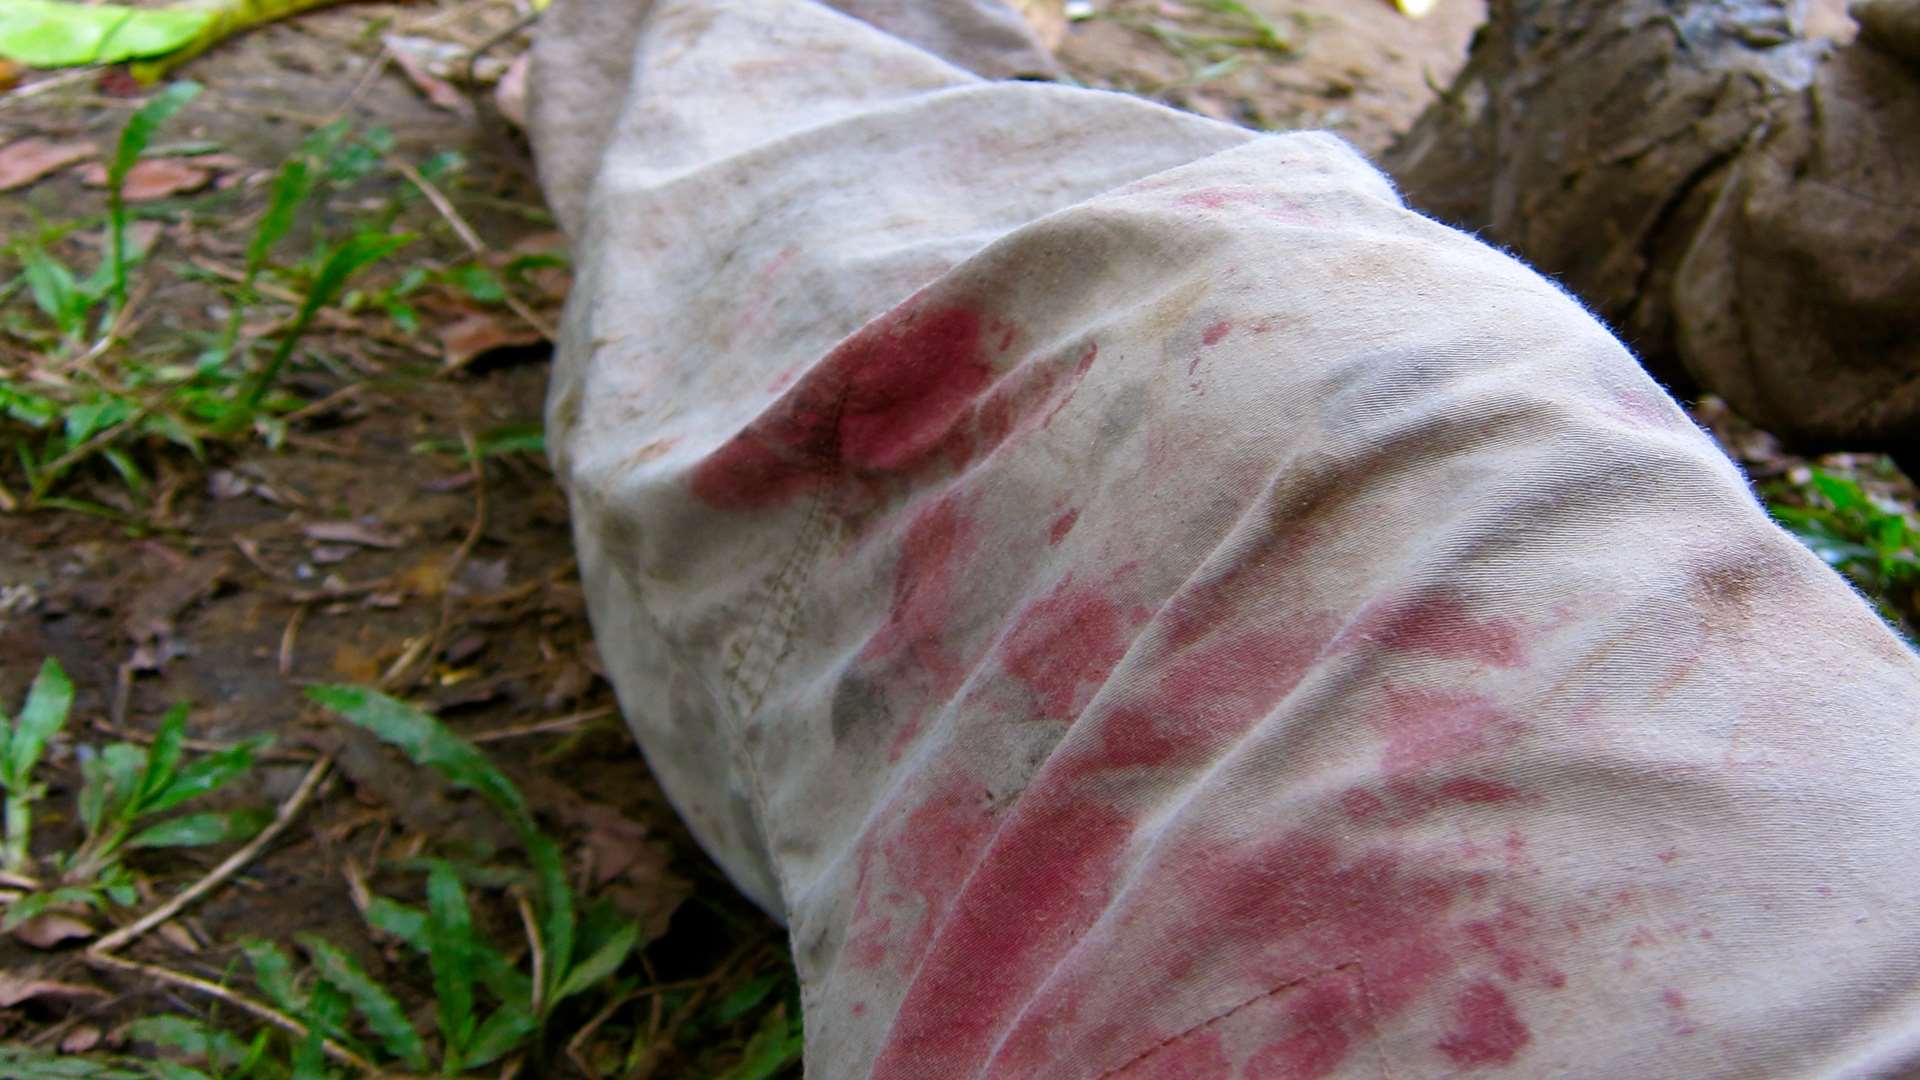 Leeches fed on Mungo's leg whilst filming in the jungle